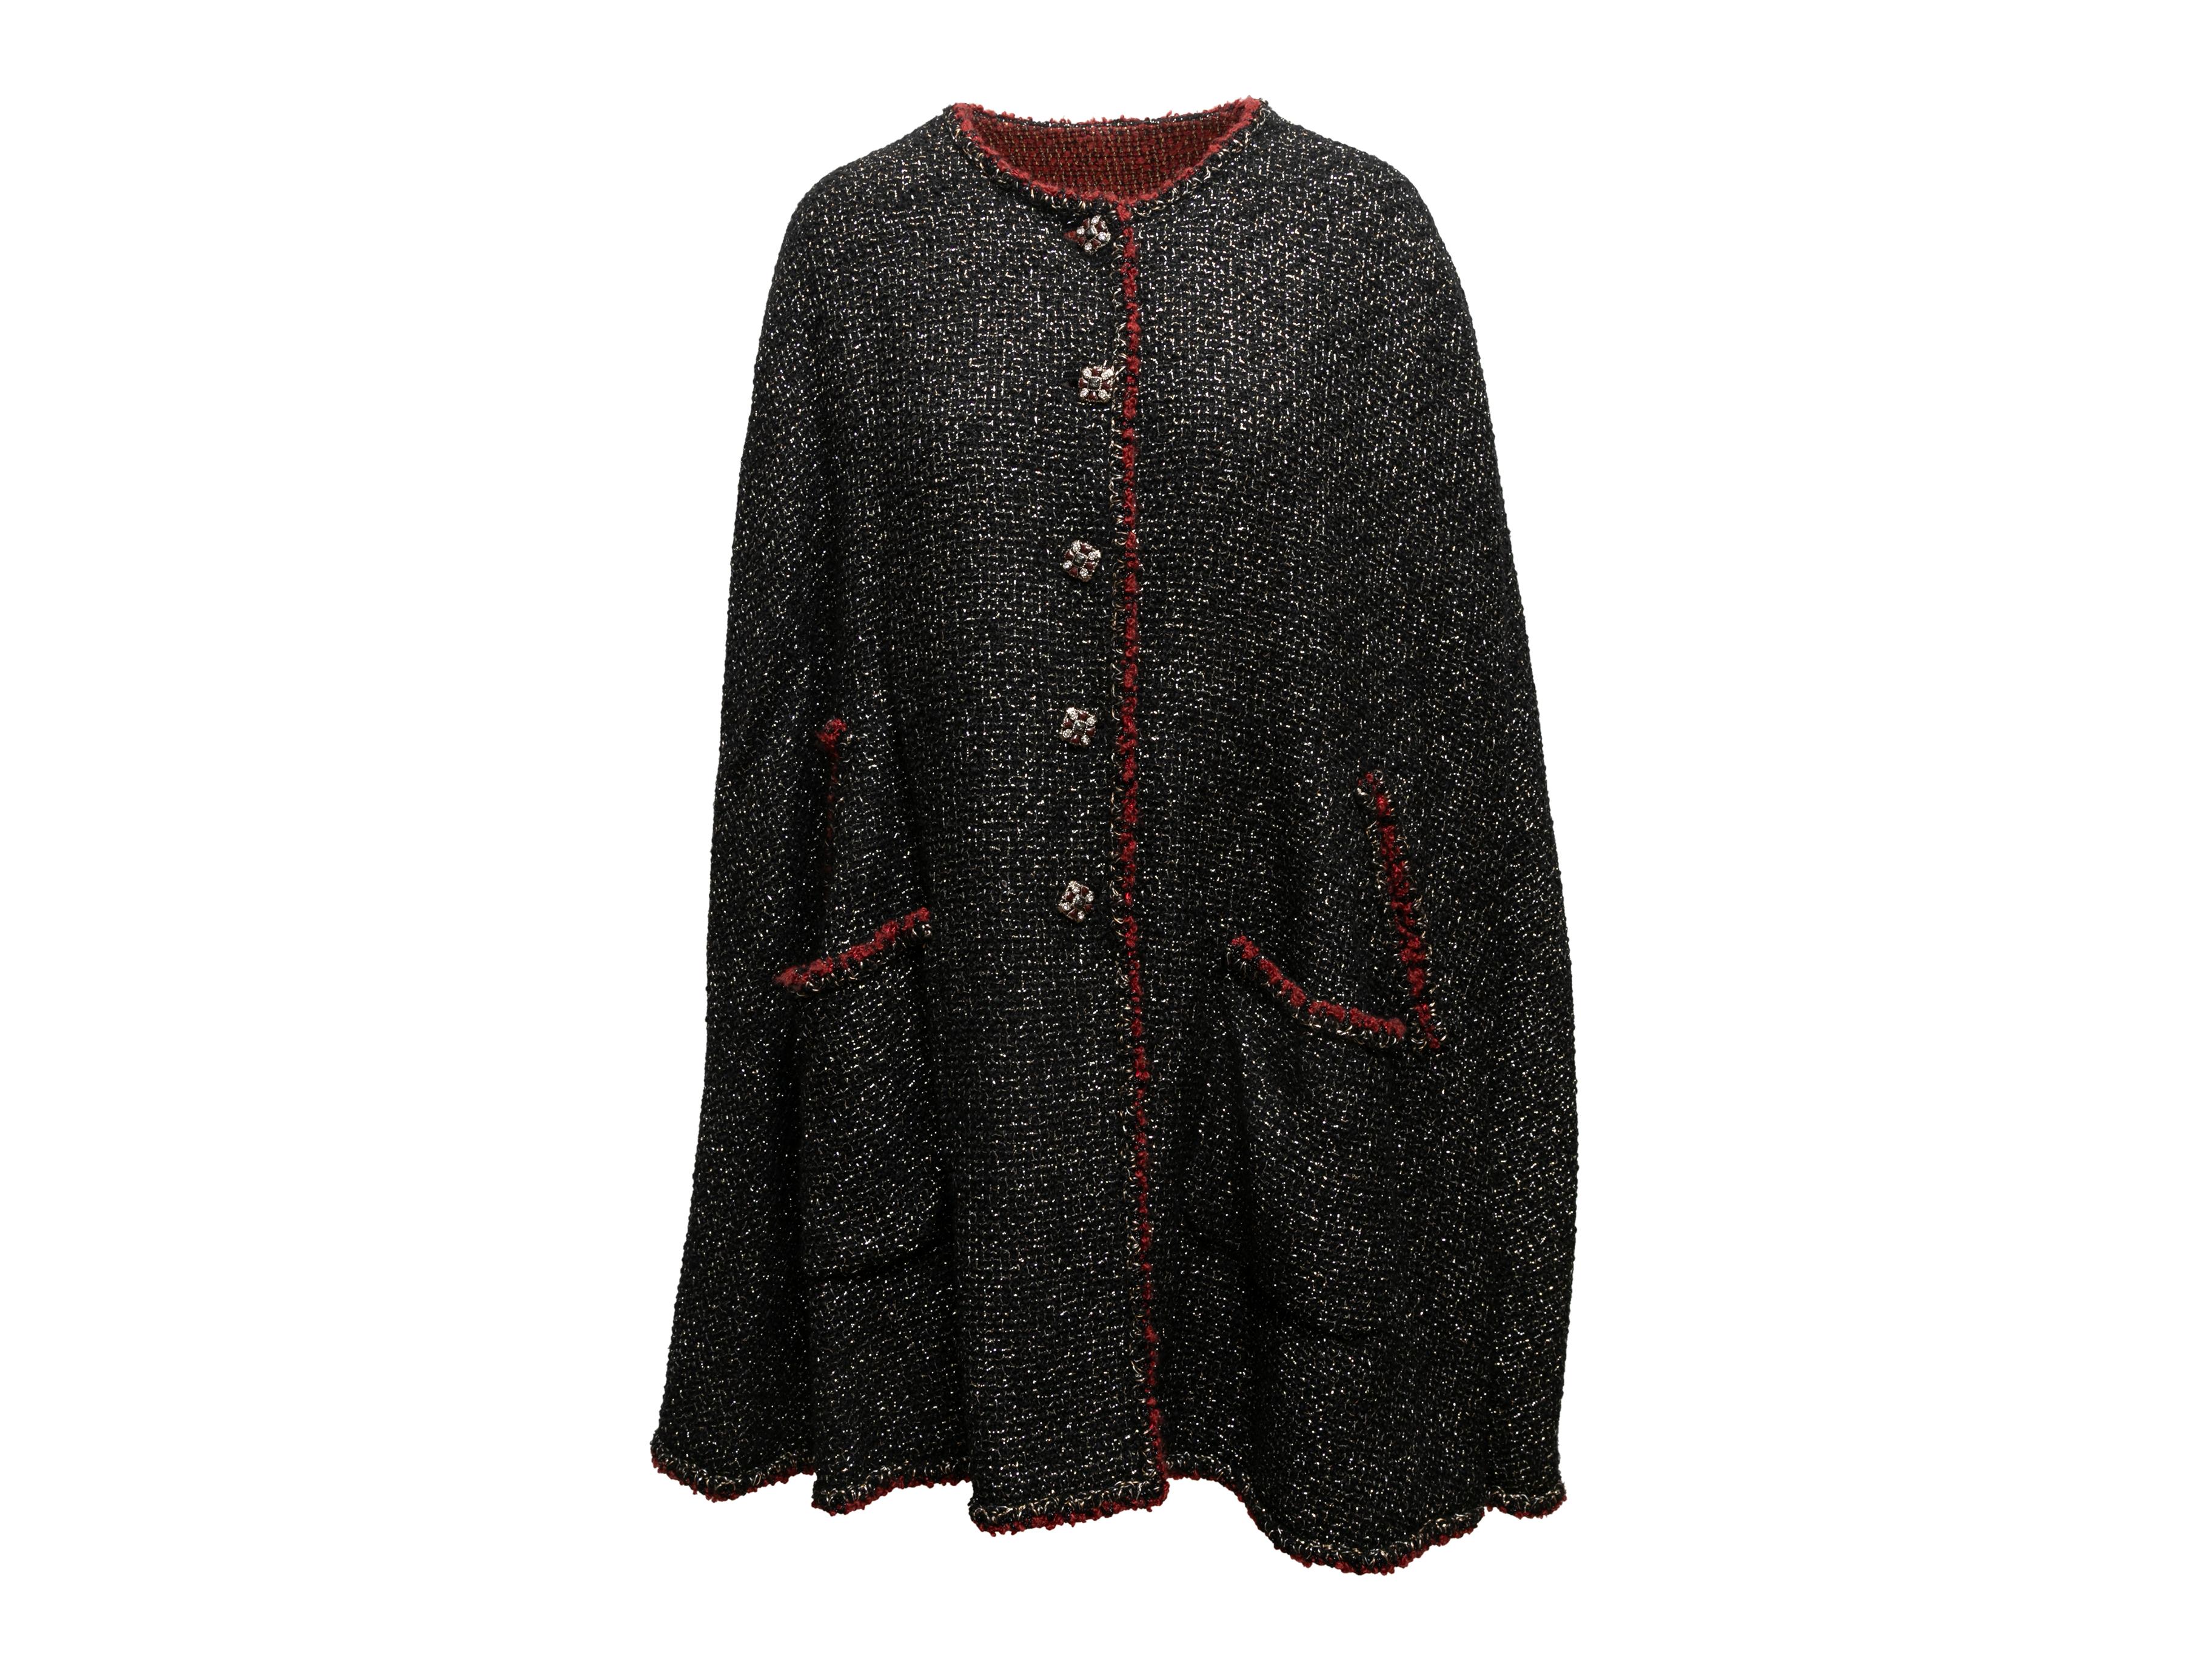 Black and red metallic tweed reversible cape by Chanel. From the Fall/Winter 2006 Collection. Crew neck. Dual pockets. Front button closures 52